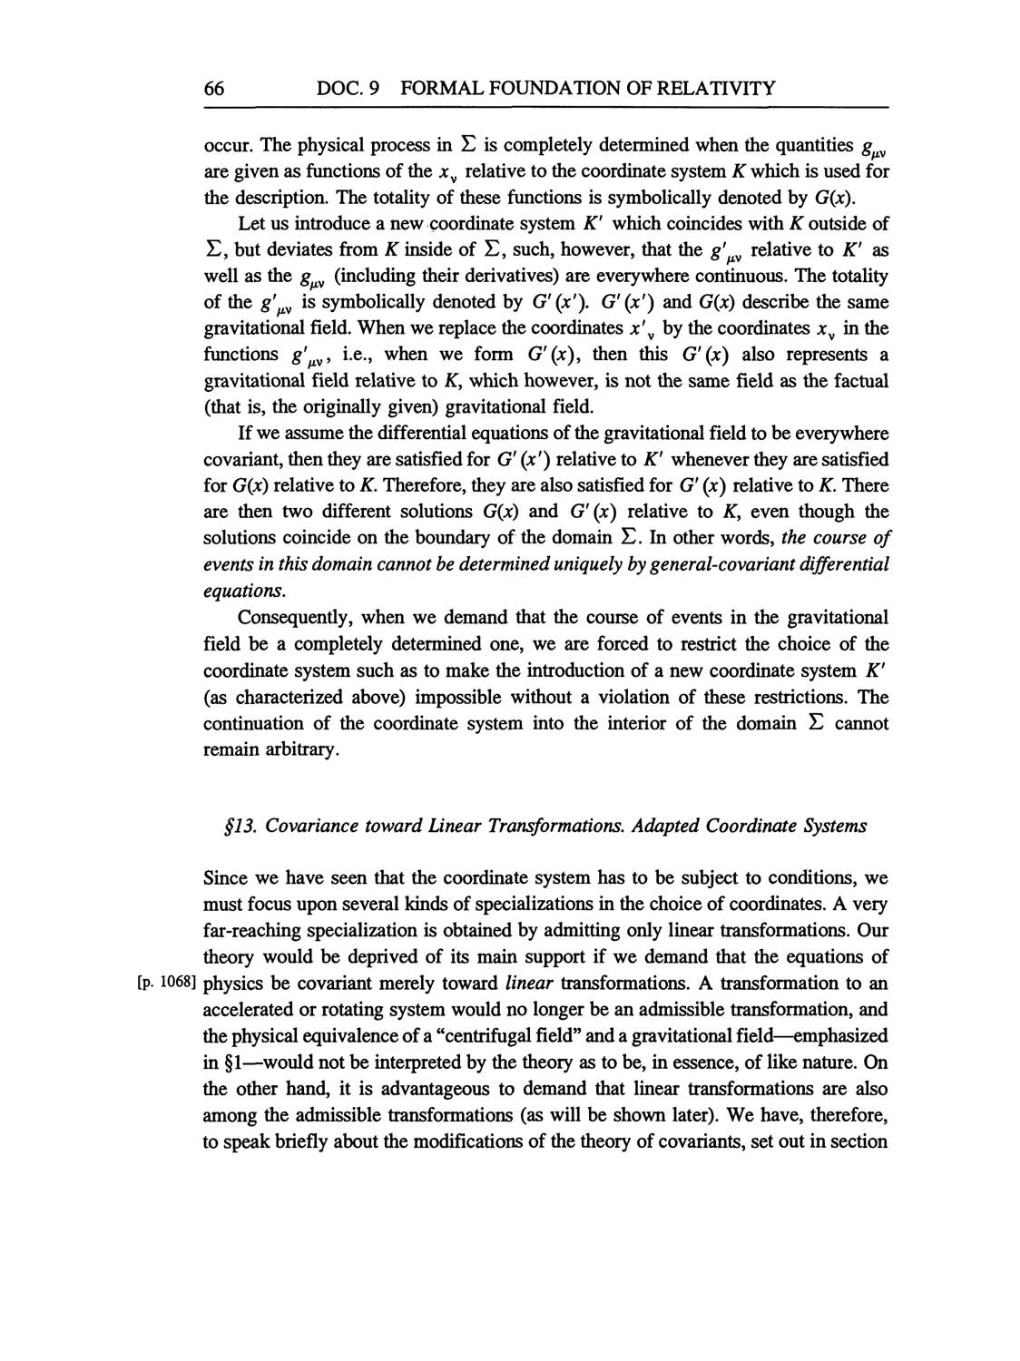 Volume 6: The Berlin Years: Writings, 1914-1917 (English translation supplement) page 66